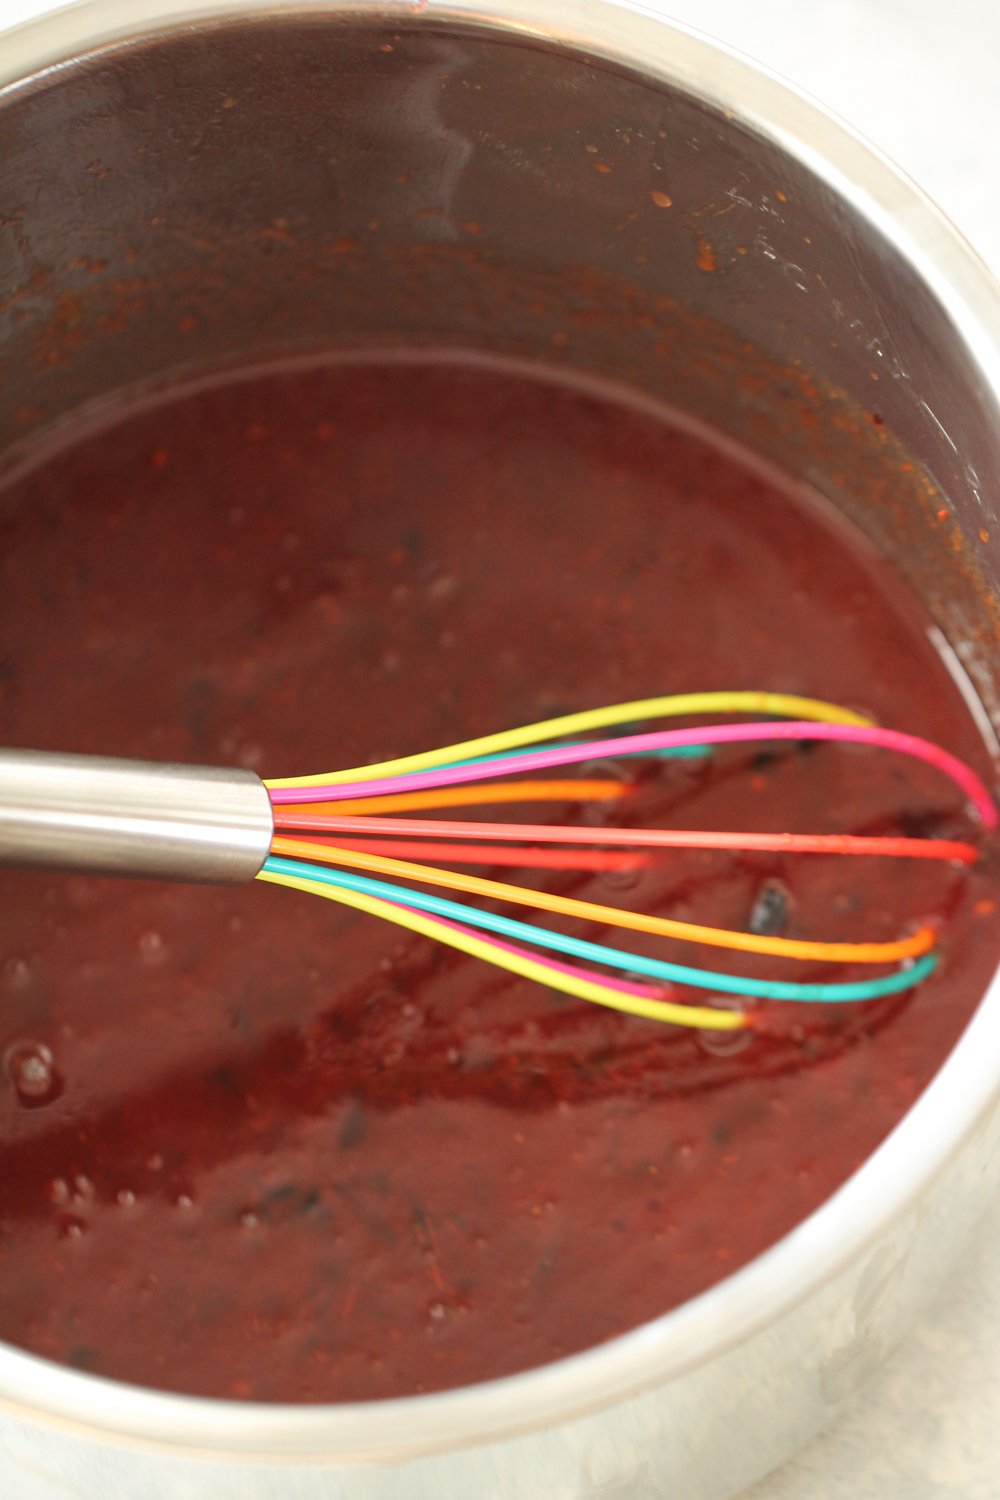 Whisking together the jelly and chili sauce